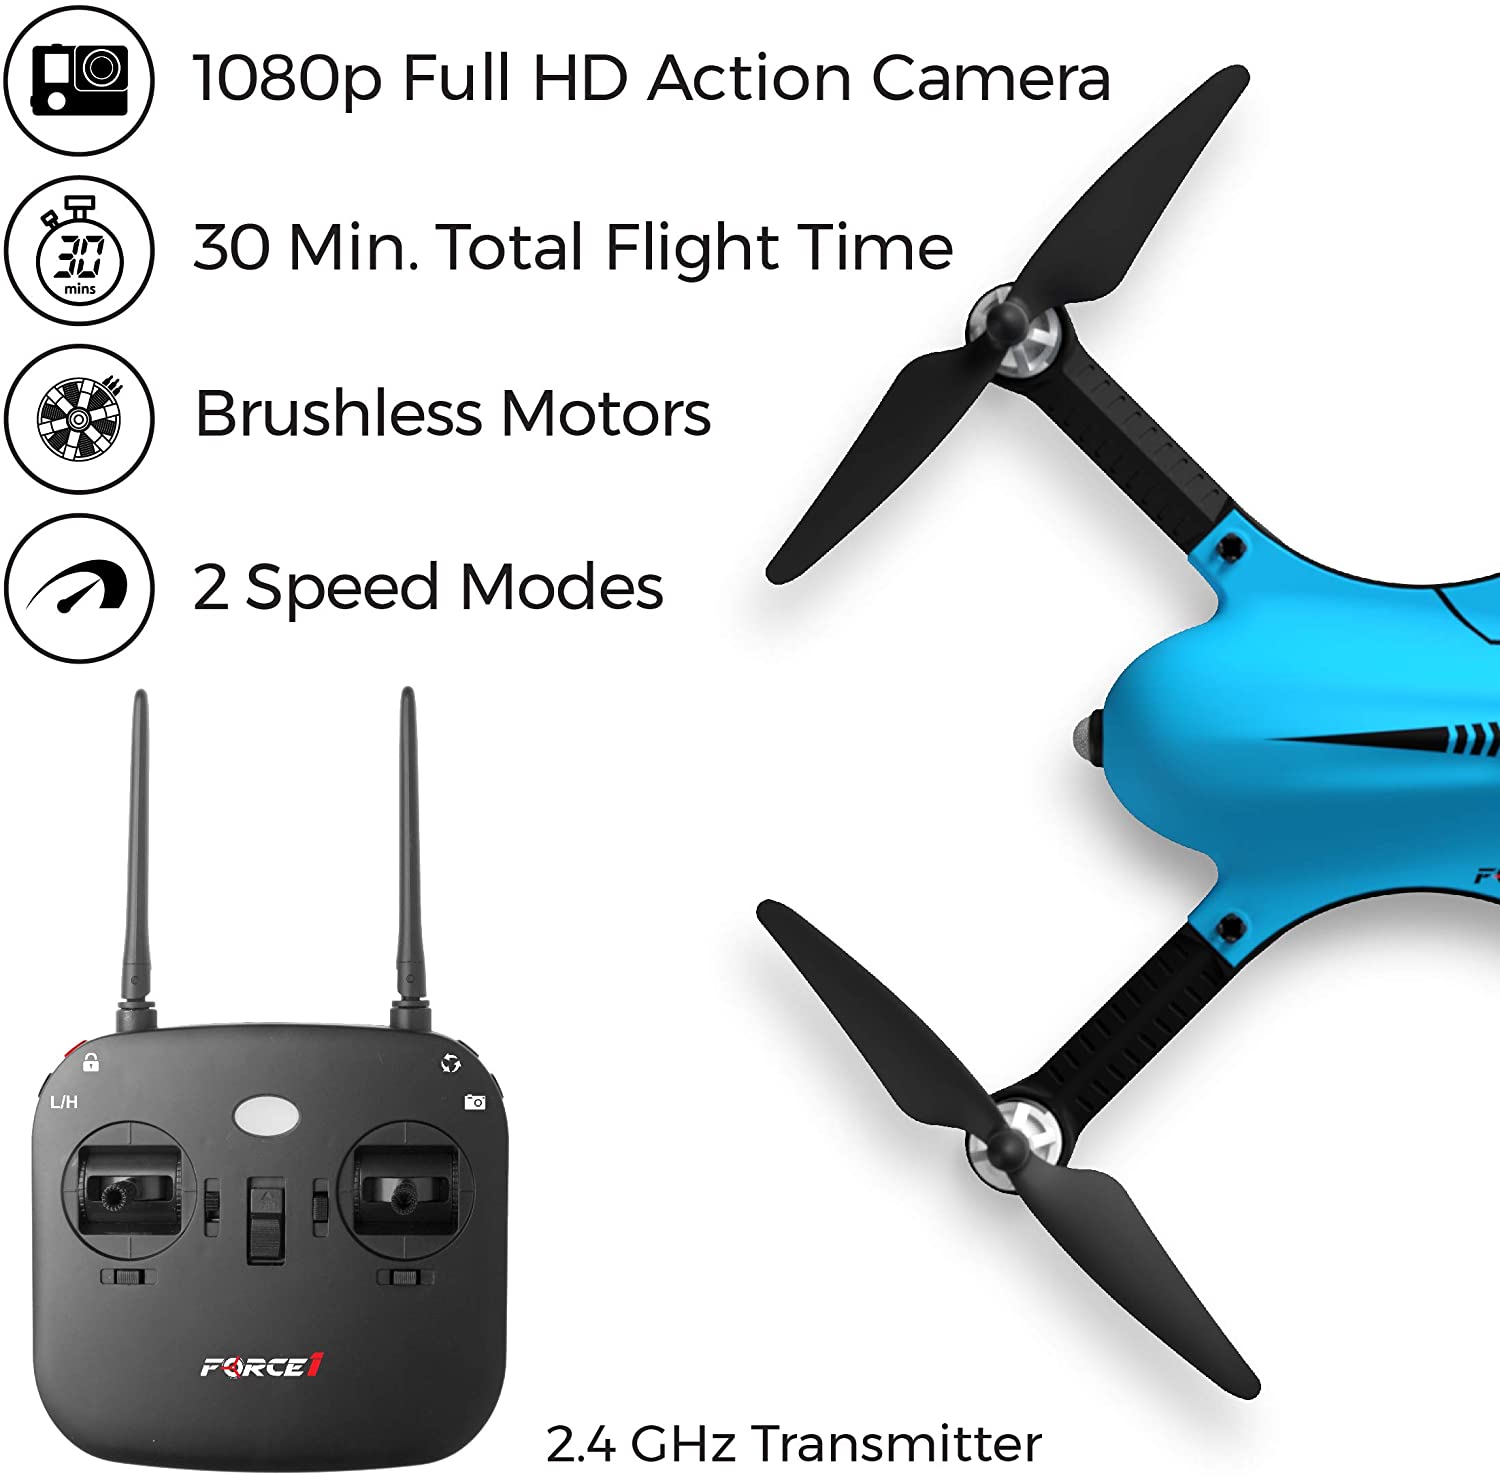 Best Drones Under 500 Updated with the Top 8 Drone Models for 2020